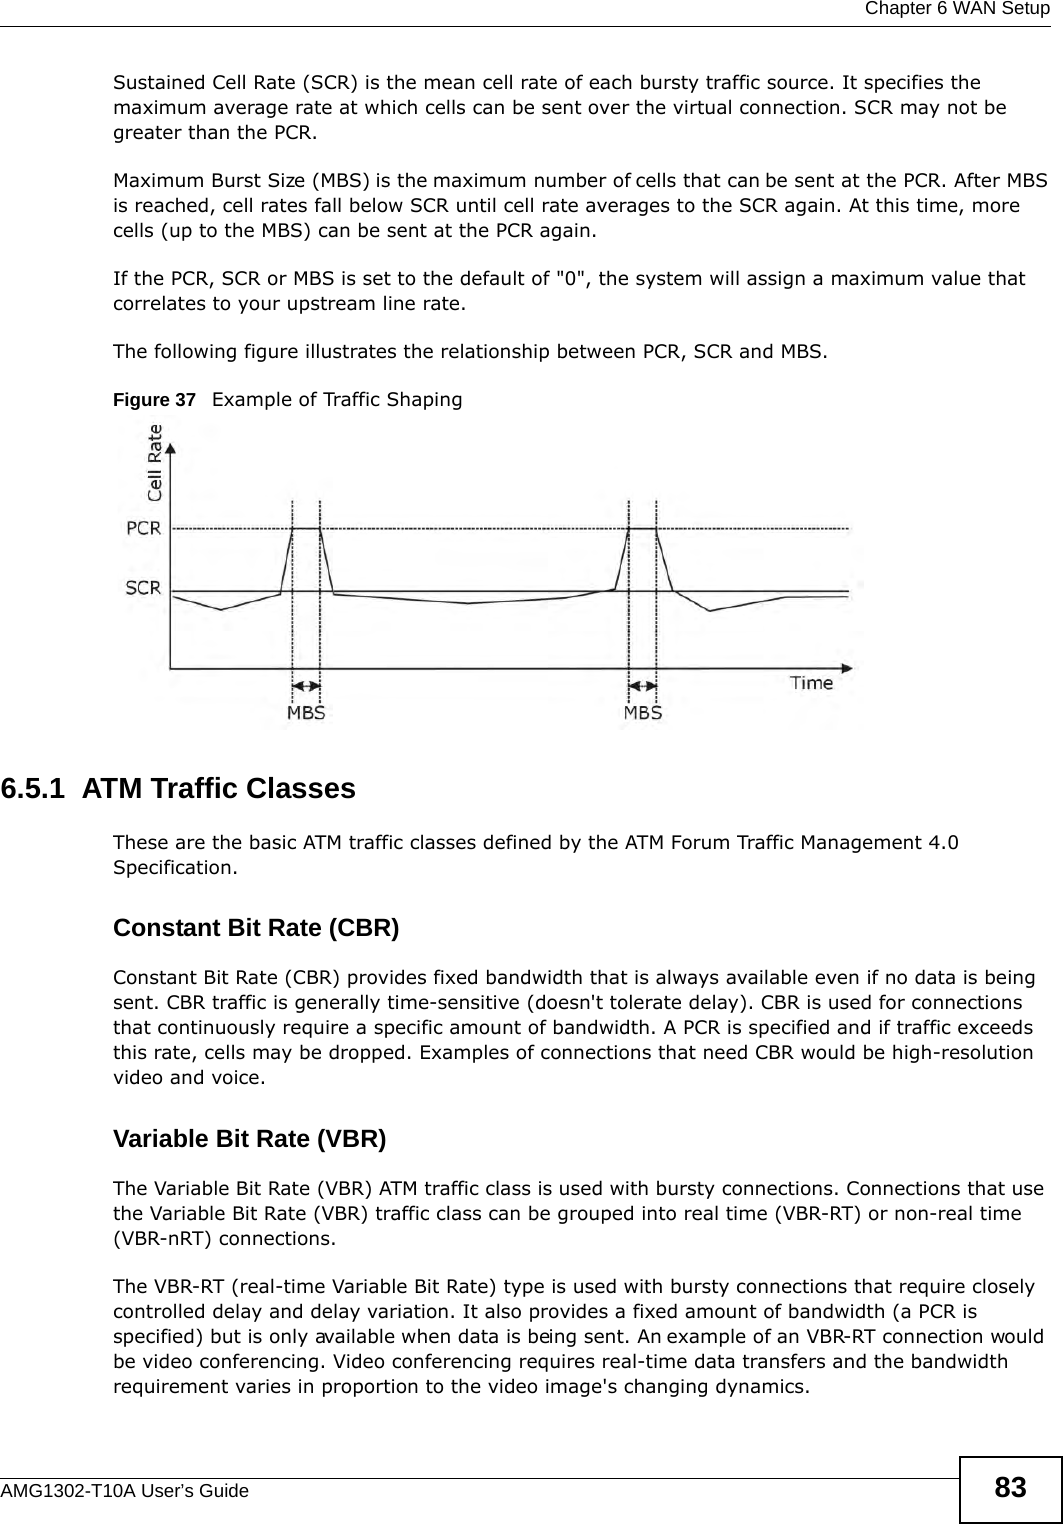  Chapter 6 WAN SetupAMG1302-T10A User’s Guide 83Sustained Cell Rate (SCR) is the mean cell rate of each bursty traffic source. It specifies the maximum average rate at which cells can be sent over the virtual connection. SCR may not be greater than the PCR.Maximum Burst Size (MBS) is the maximum number of cells that can be sent at the PCR. After MBS is reached, cell rates fall below SCR until cell rate averages to the SCR again. At this time, more cells (up to the MBS) can be sent at the PCR again.If the PCR, SCR or MBS is set to the default of &quot;0&quot;, the system will assign a maximum value that correlates to your upstream line rate. The following figure illustrates the relationship between PCR, SCR and MBS. Figure 37   Example of Traffic Shaping6.5.1  ATM Traffic ClassesThese are the basic ATM traffic classes defined by the ATM Forum Traffic Management 4.0 Specification. Constant Bit Rate (CBR)Constant Bit Rate (CBR) provides fixed bandwidth that is always available even if no data is being sent. CBR traffic is generally time-sensitive (doesn&apos;t tolerate delay). CBR is used for connections that continuously require a specific amount of bandwidth. A PCR is specified and if traffic exceeds this rate, cells may be dropped. Examples of connections that need CBR would be high-resolution video and voice.Variable Bit Rate (VBR) The Variable Bit Rate (VBR) ATM traffic class is used with bursty connections. Connections that use the Variable Bit Rate (VBR) traffic class can be grouped into real time (VBR-RT) or non-real time (VBR-nRT) connections. The VBR-RT (real-time Variable Bit Rate) type is used with bursty connections that require closely controlled delay and delay variation. It also provides a fixed amount of bandwidth (a PCR is specified) but is only available when data is being sent. An example of an VBR-RT connection would be video conferencing. Video conferencing requires real-time data transfers and the bandwidth requirement varies in proportion to the video image&apos;s changing dynamics. 